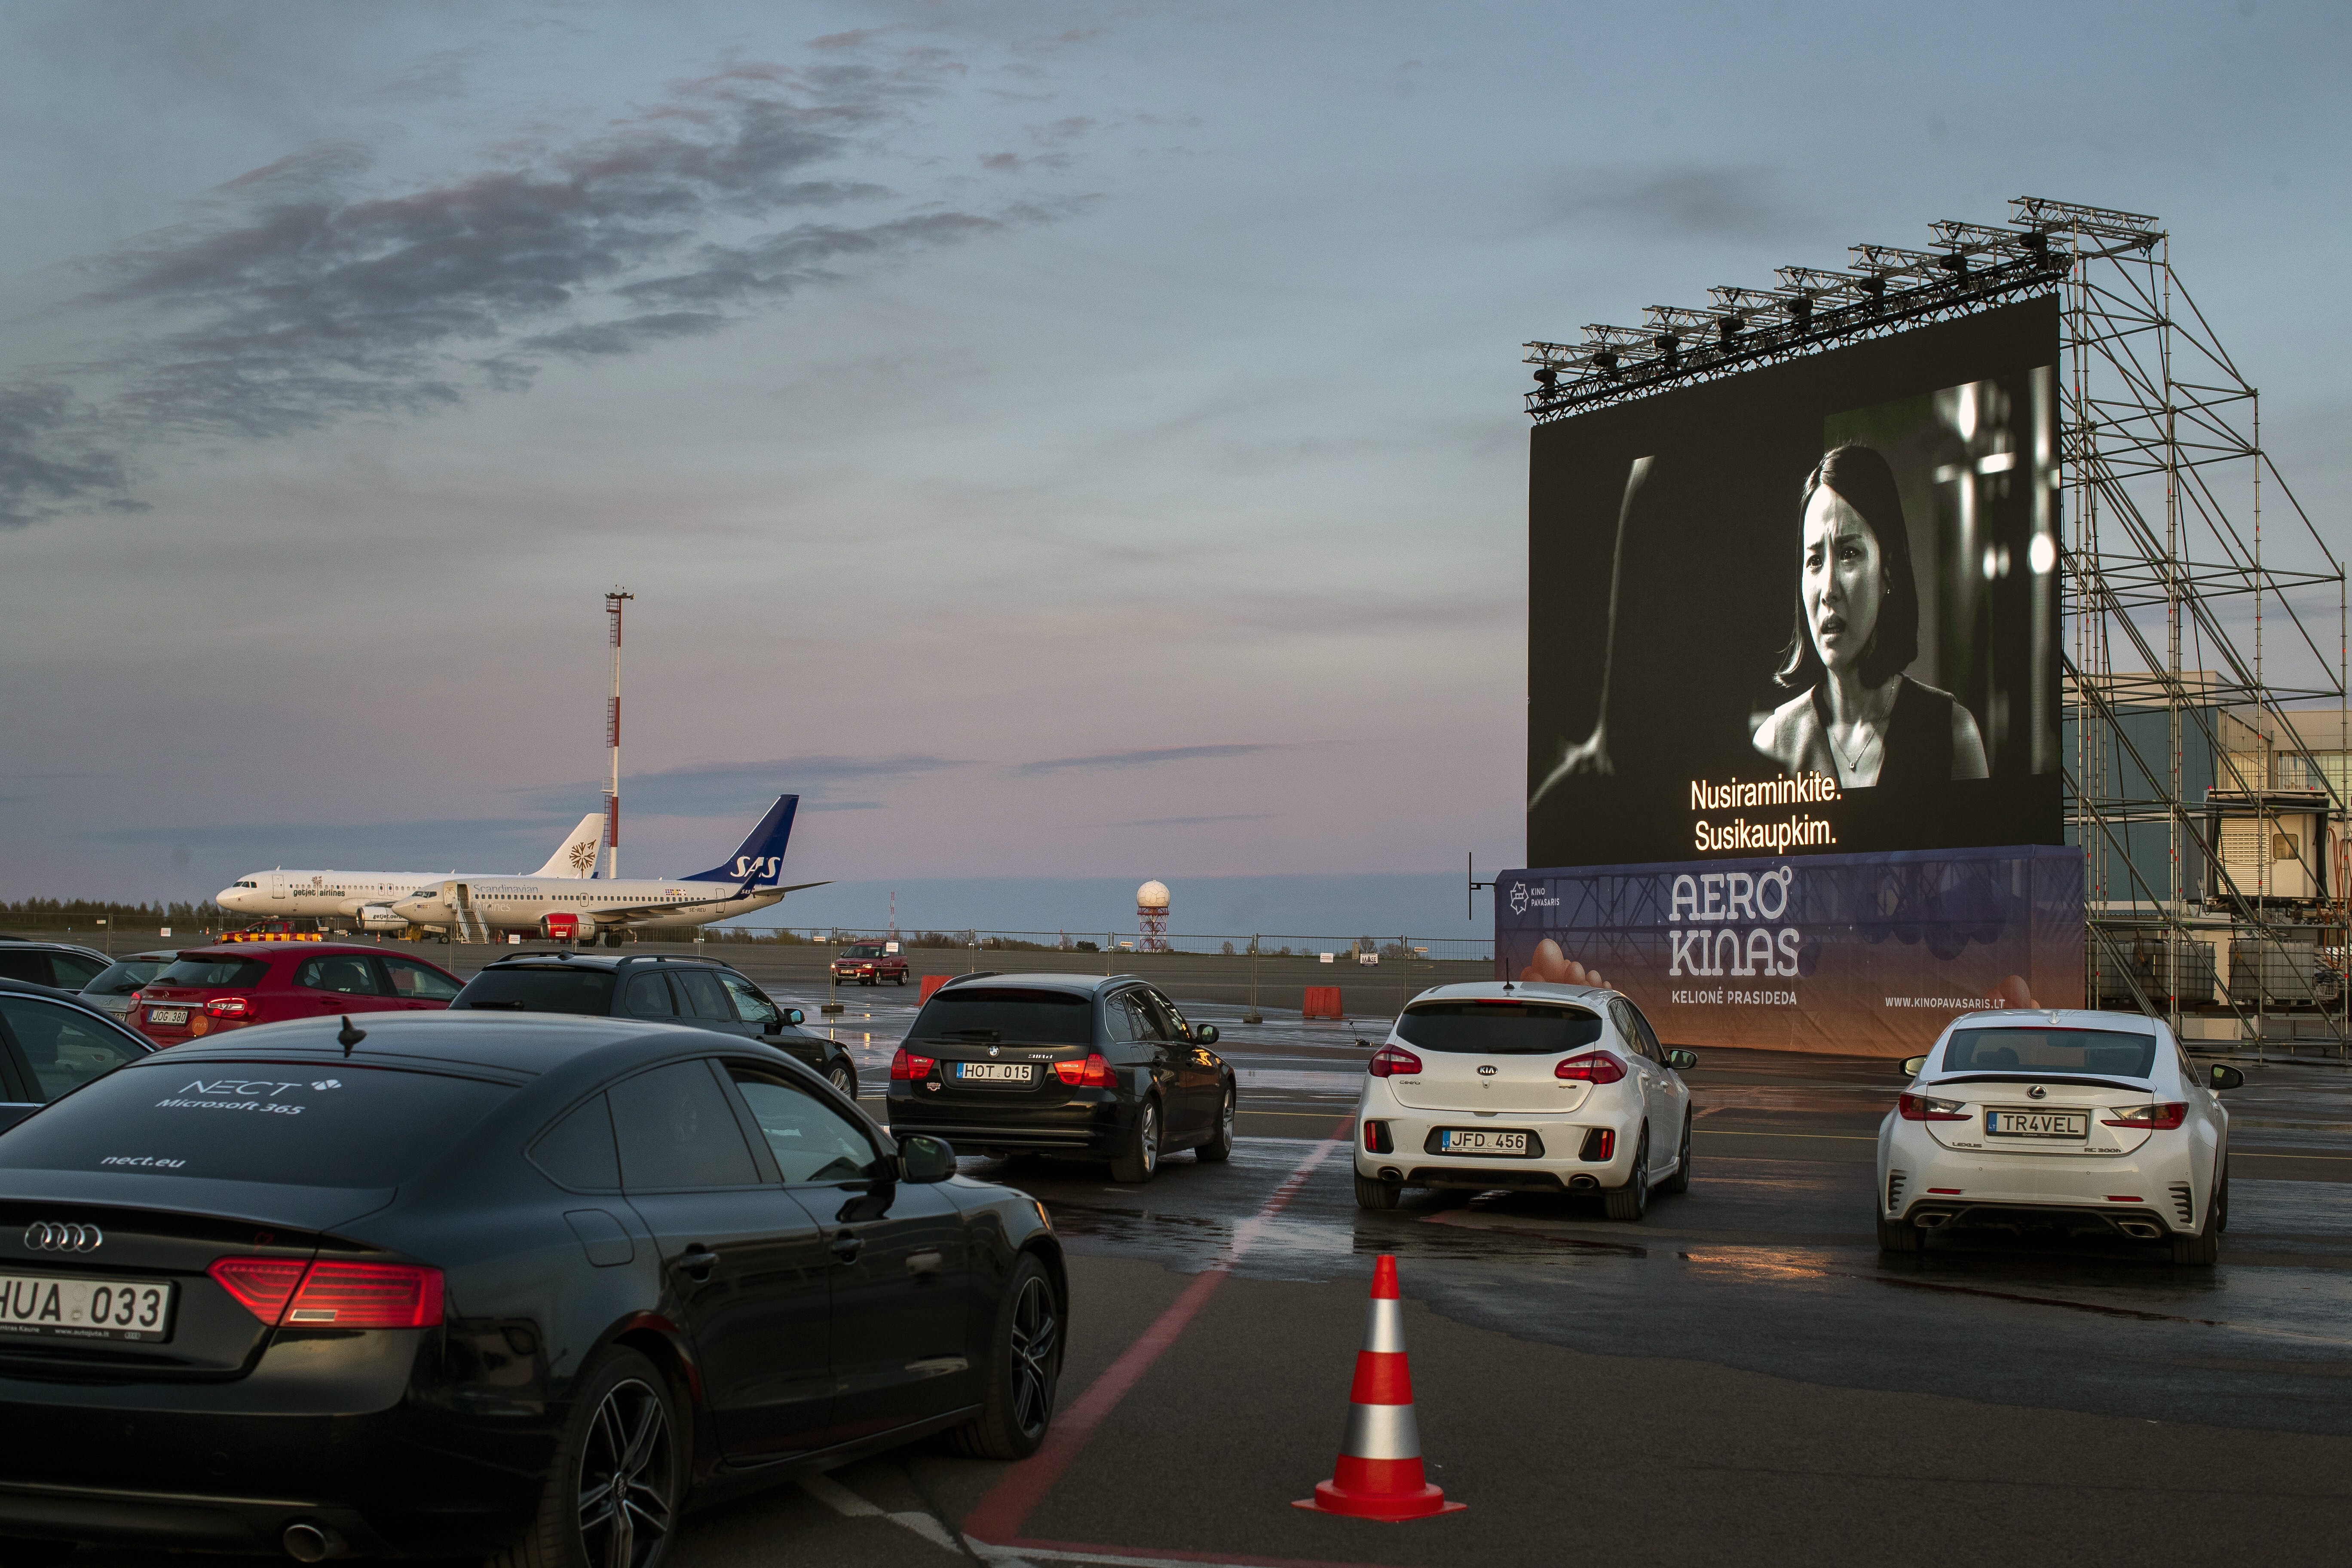 While they can't service the same number of fliers, airports have been using their massive empty terminals and adjacent spaces for other means, such as for drive-in movies and Covid-19 testing. Photo: AP